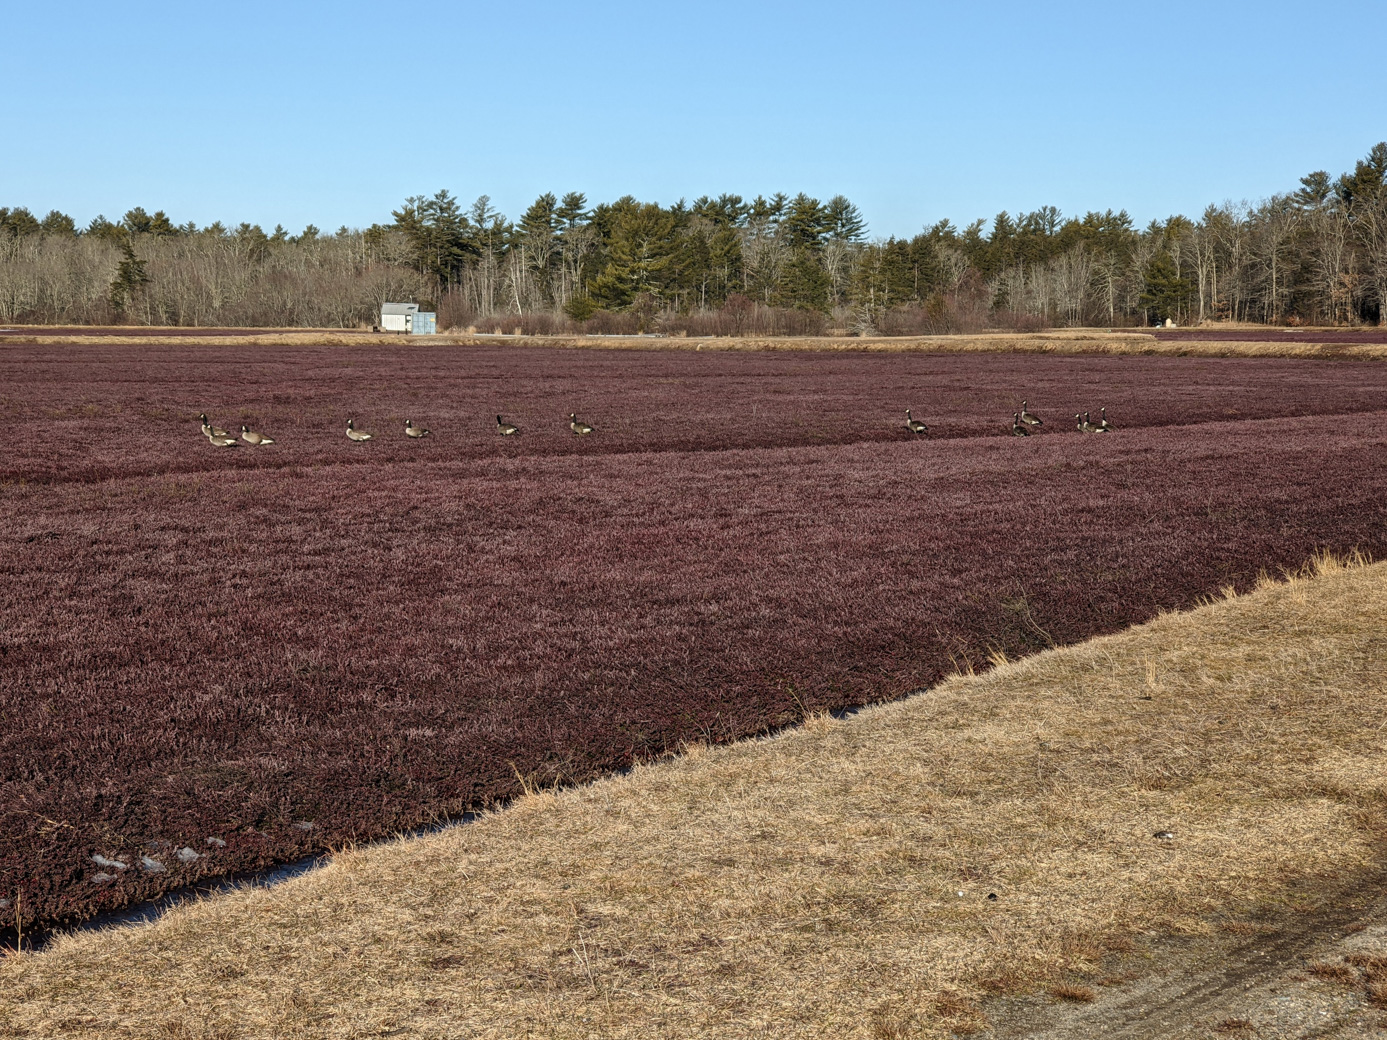 Canada Geese on a cranberry bog.